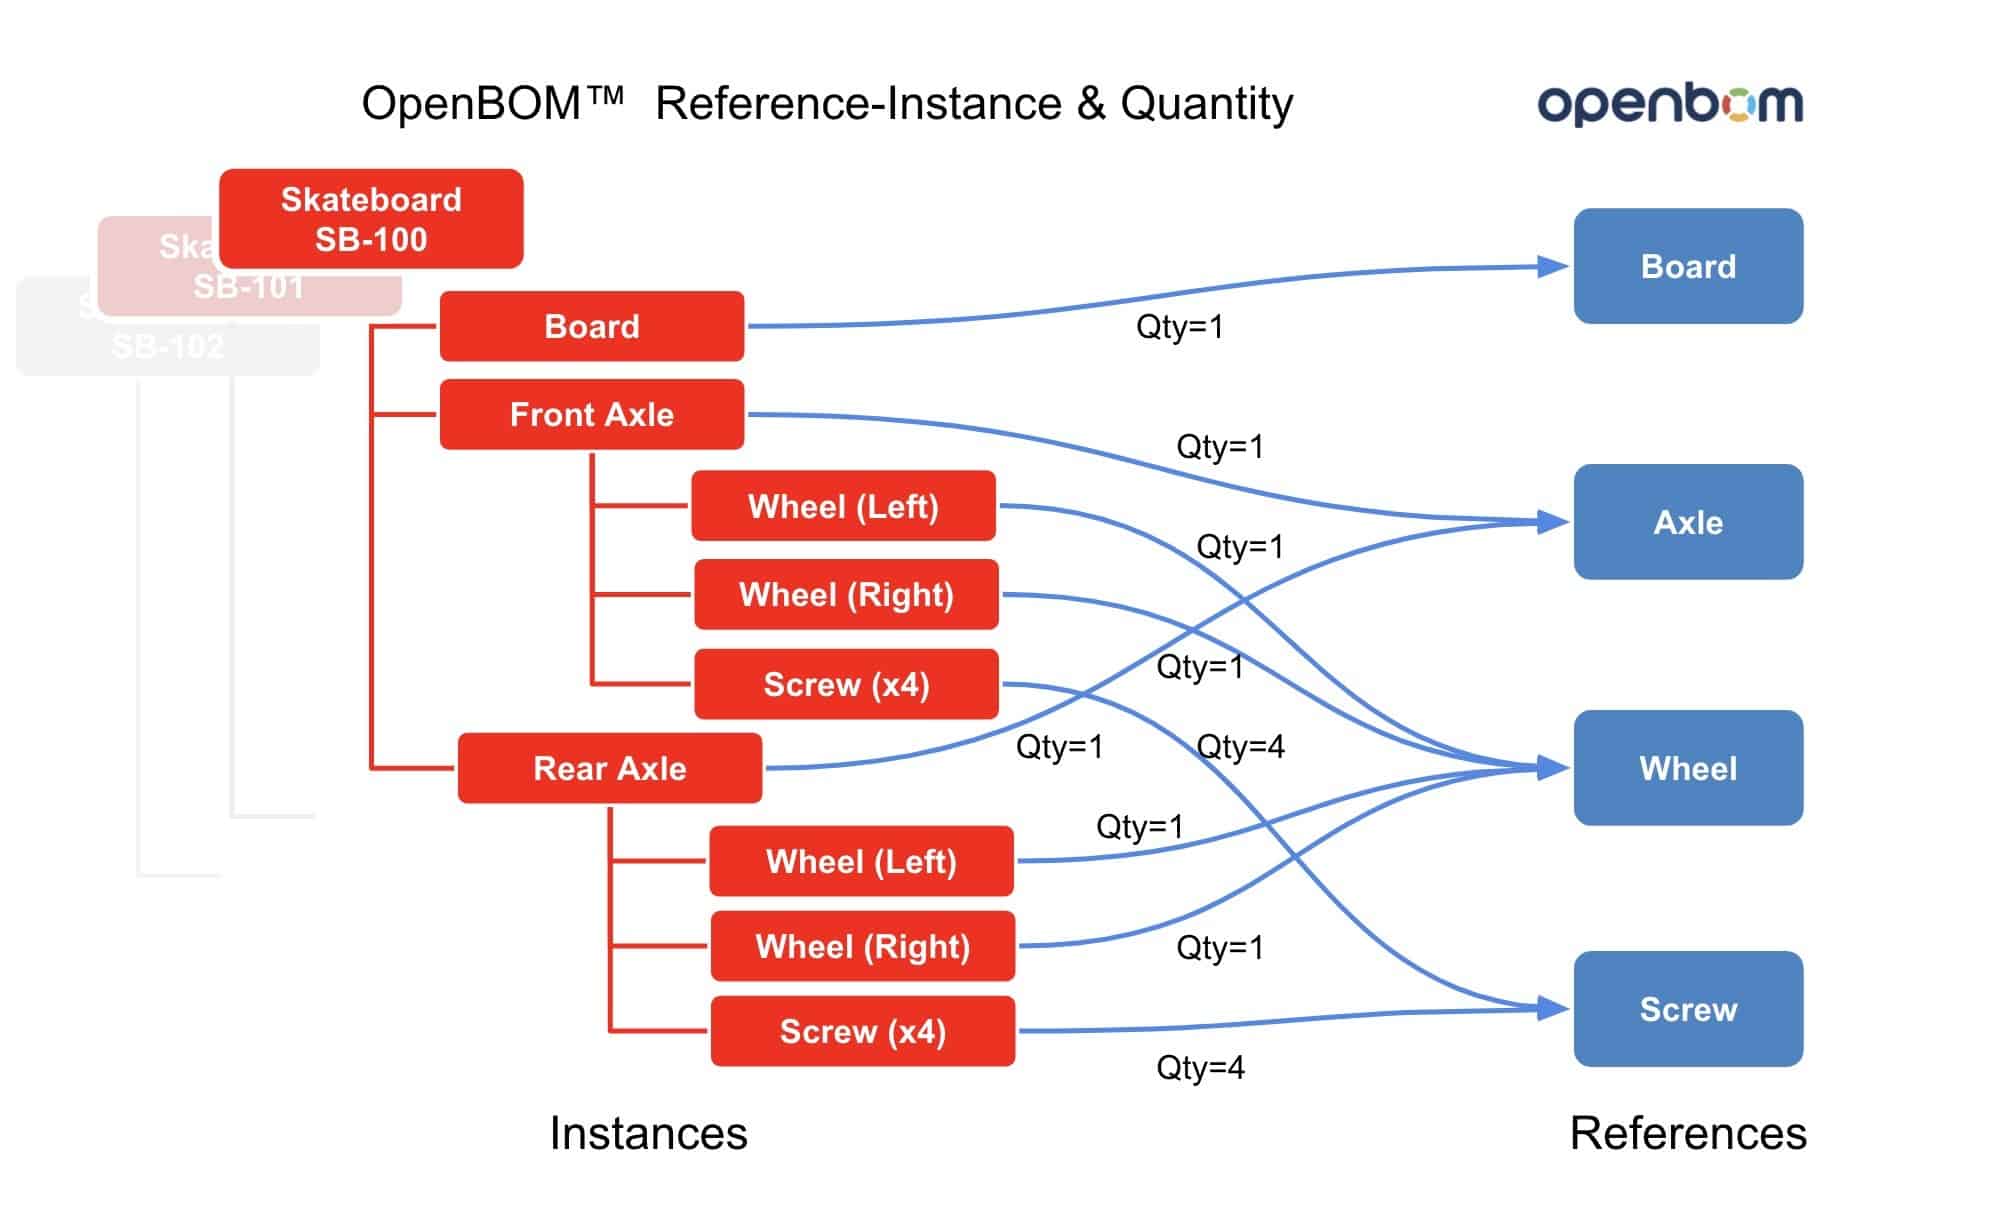 WEBINAR: OpenBOM Reference-Instance Model and a Single Source of Truth